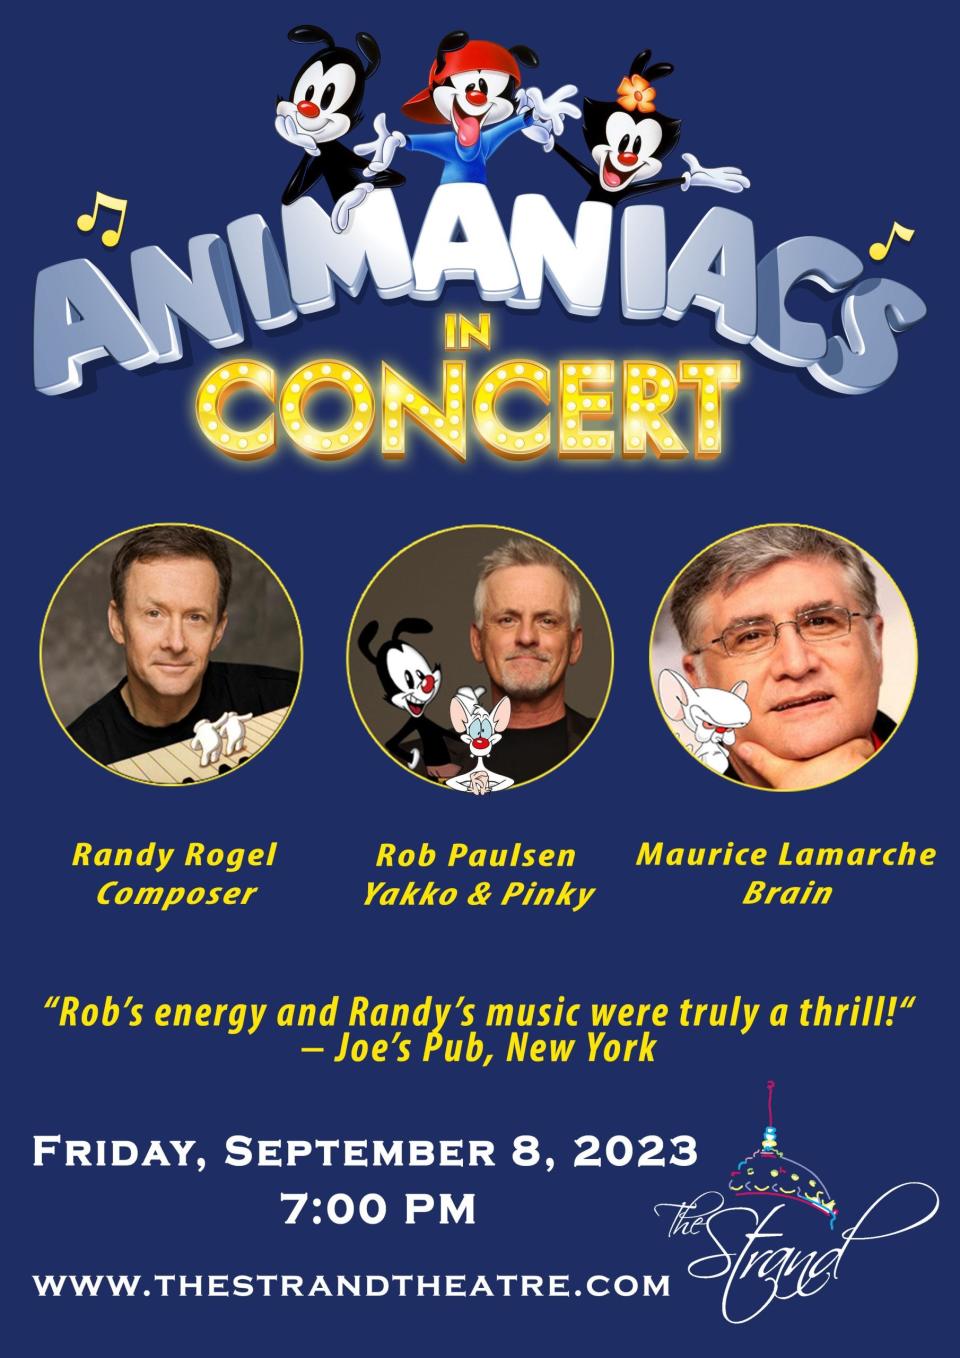 The Animaniacs in Concert is for hip and funny adults in the house, but kids will love it, too.